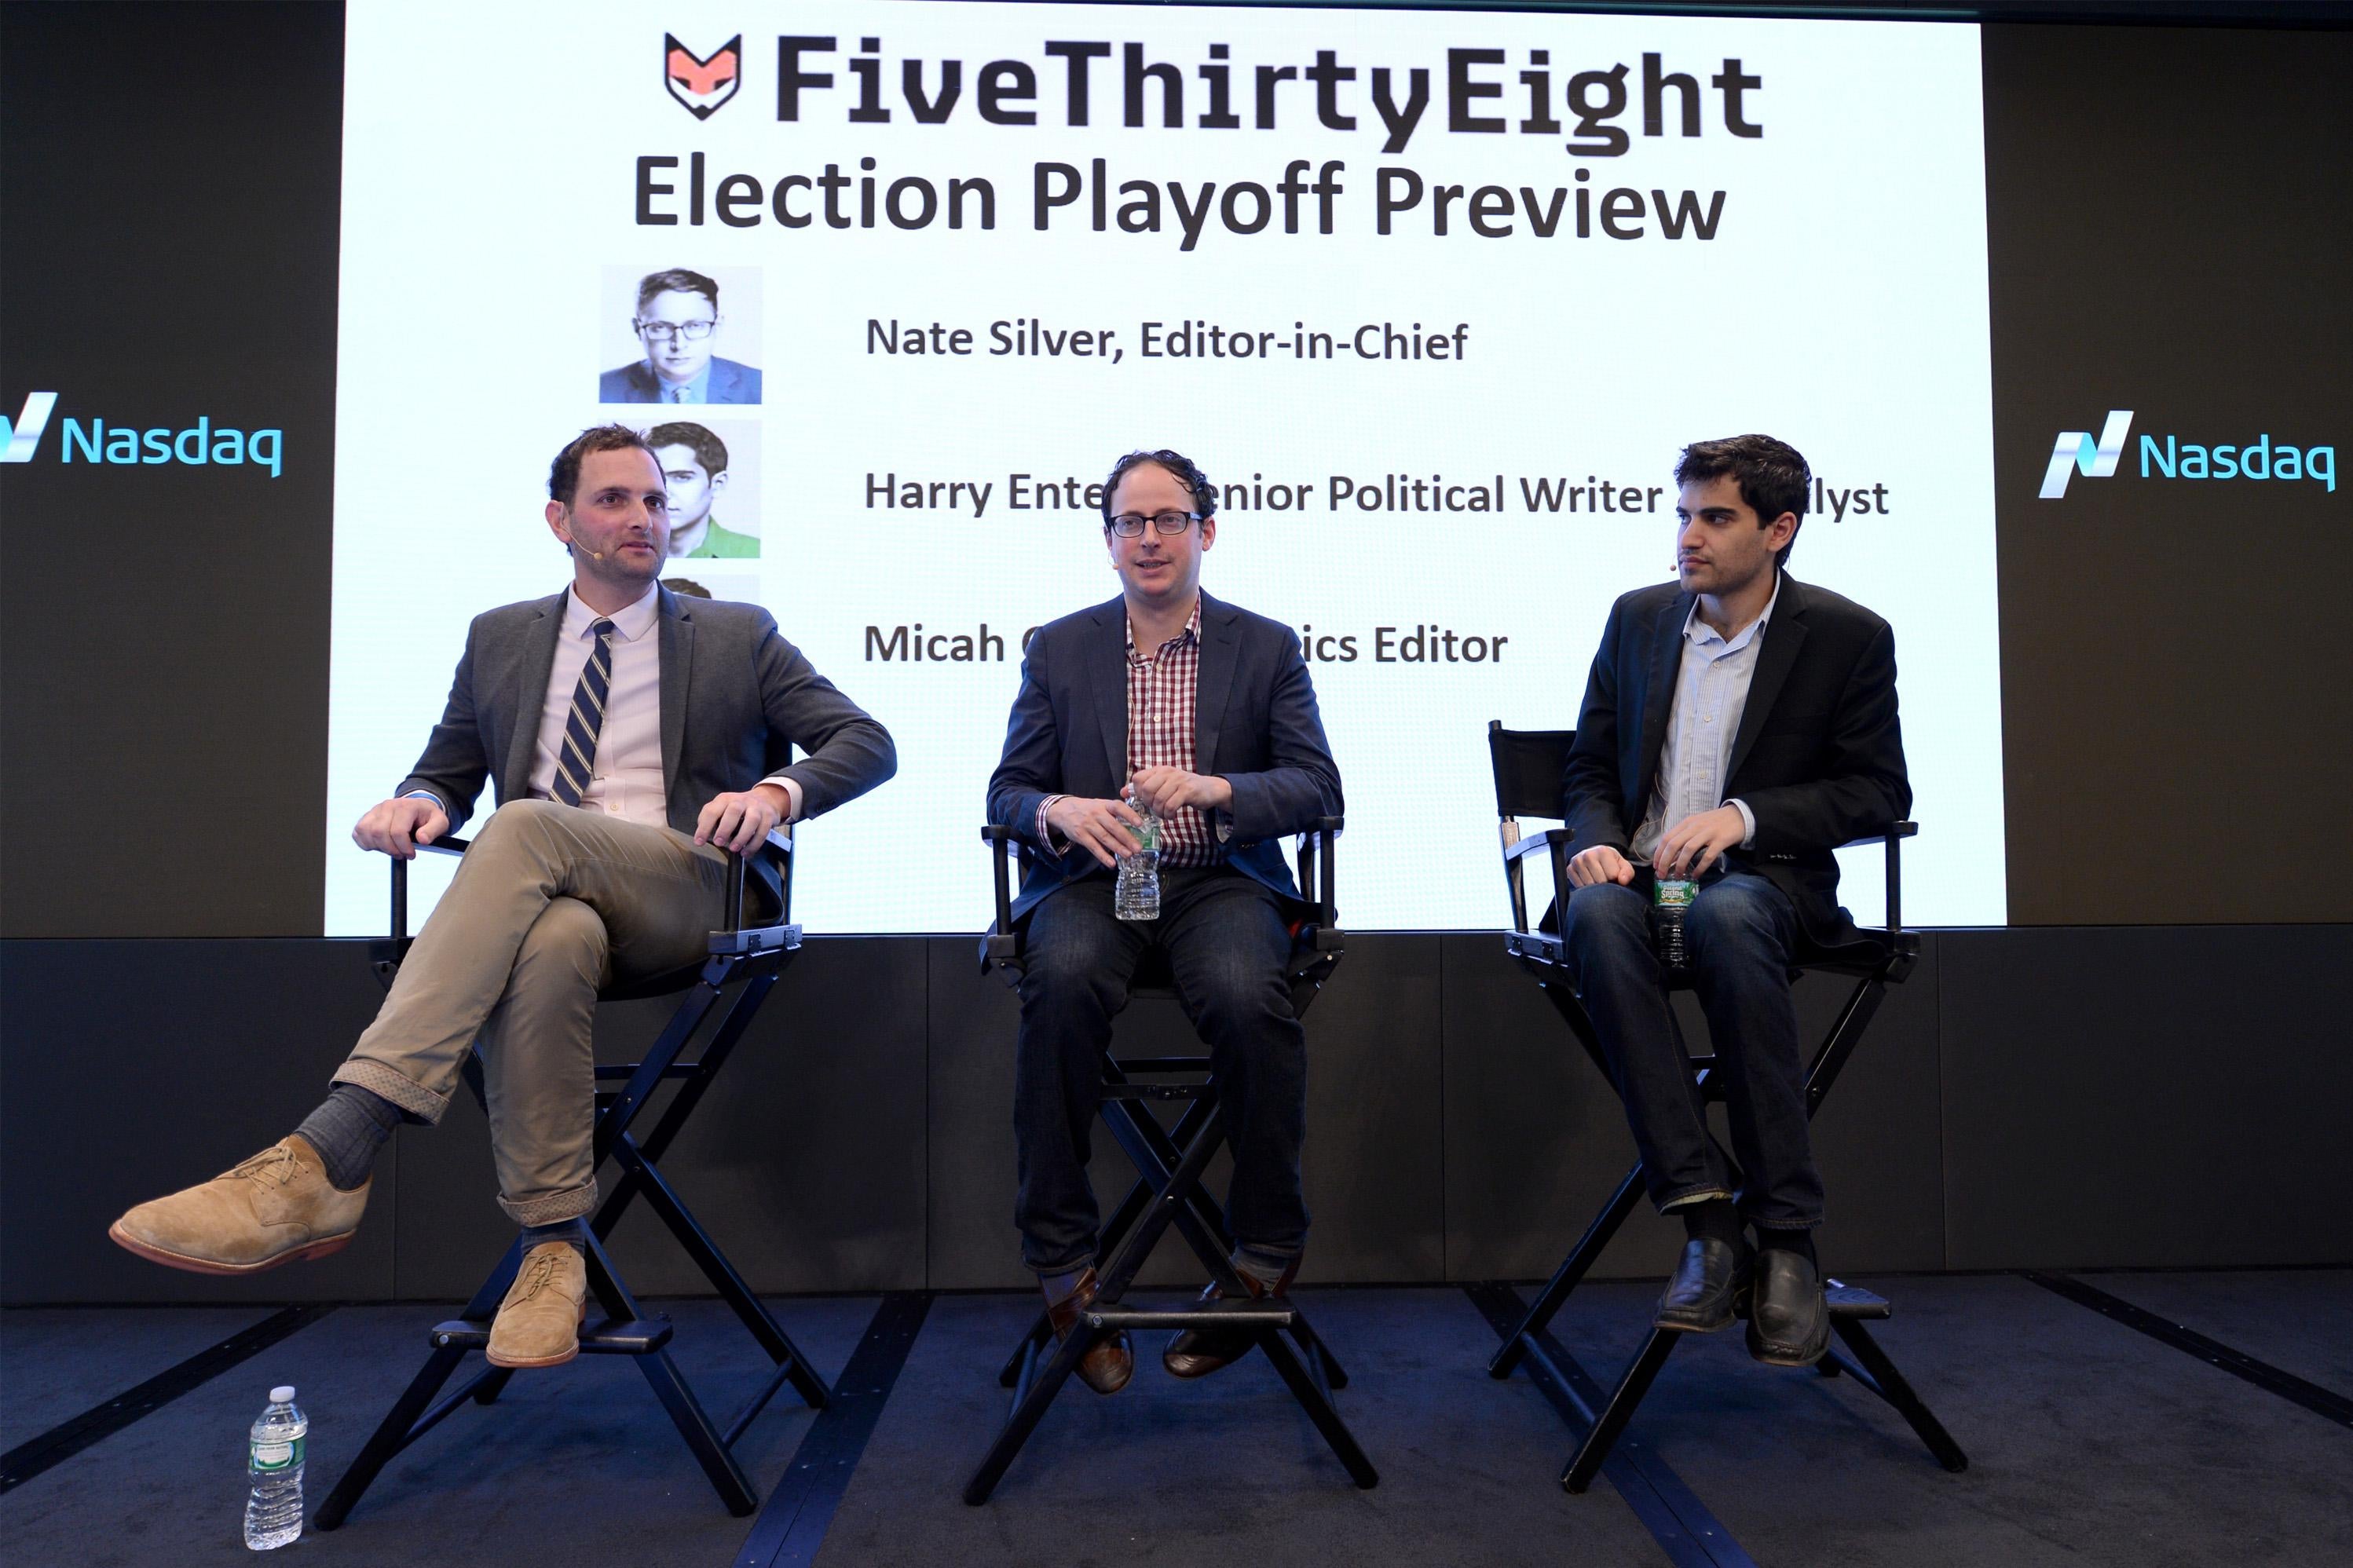 Three white guys sit in chairs in front of a screen that says "FiveThirtyEight Election Playoff Preview"